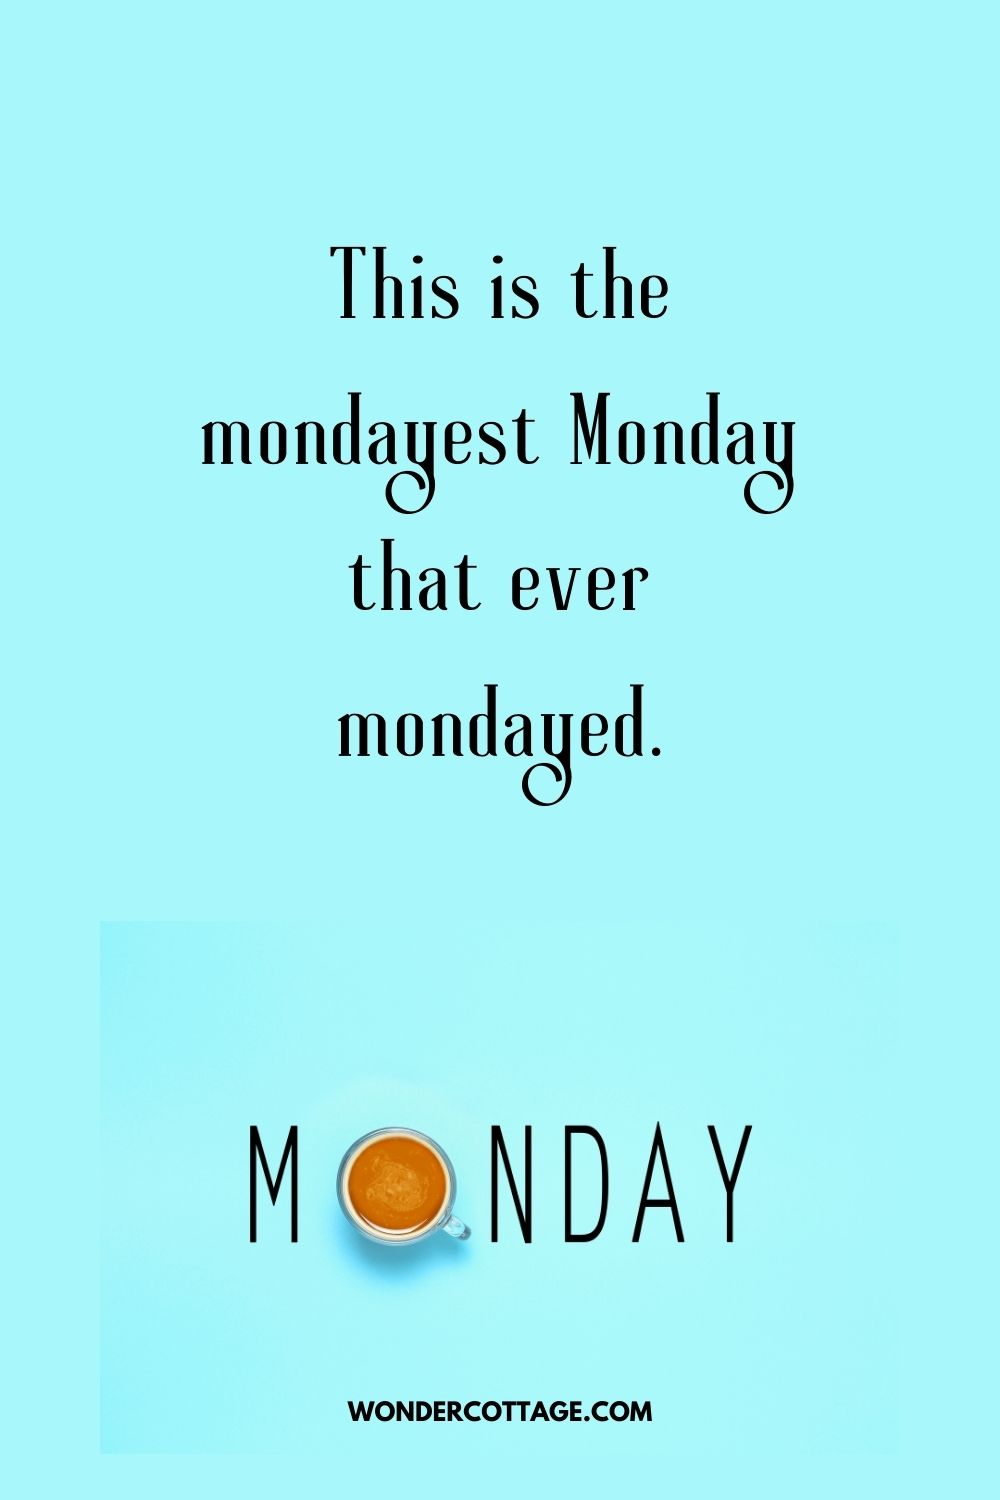 This is the mondayest Monday that ever mondayed.